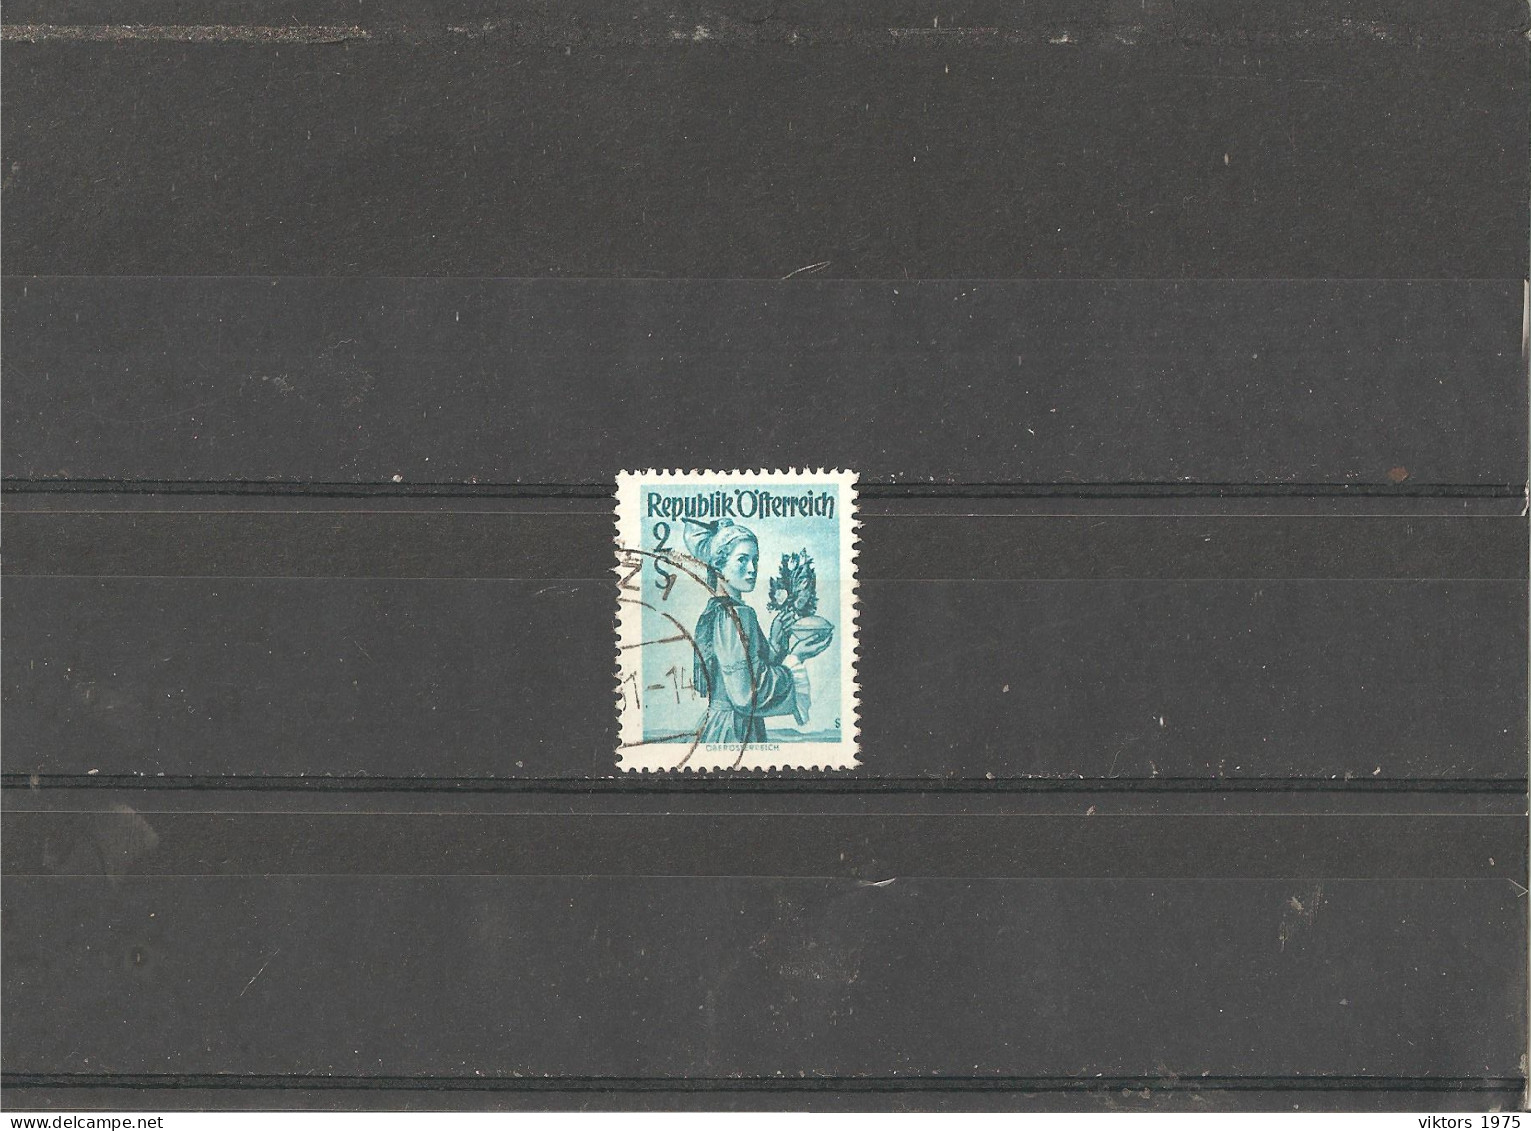 Used Stamp Nr.919 In MICHEL Catalog - Used Stamps